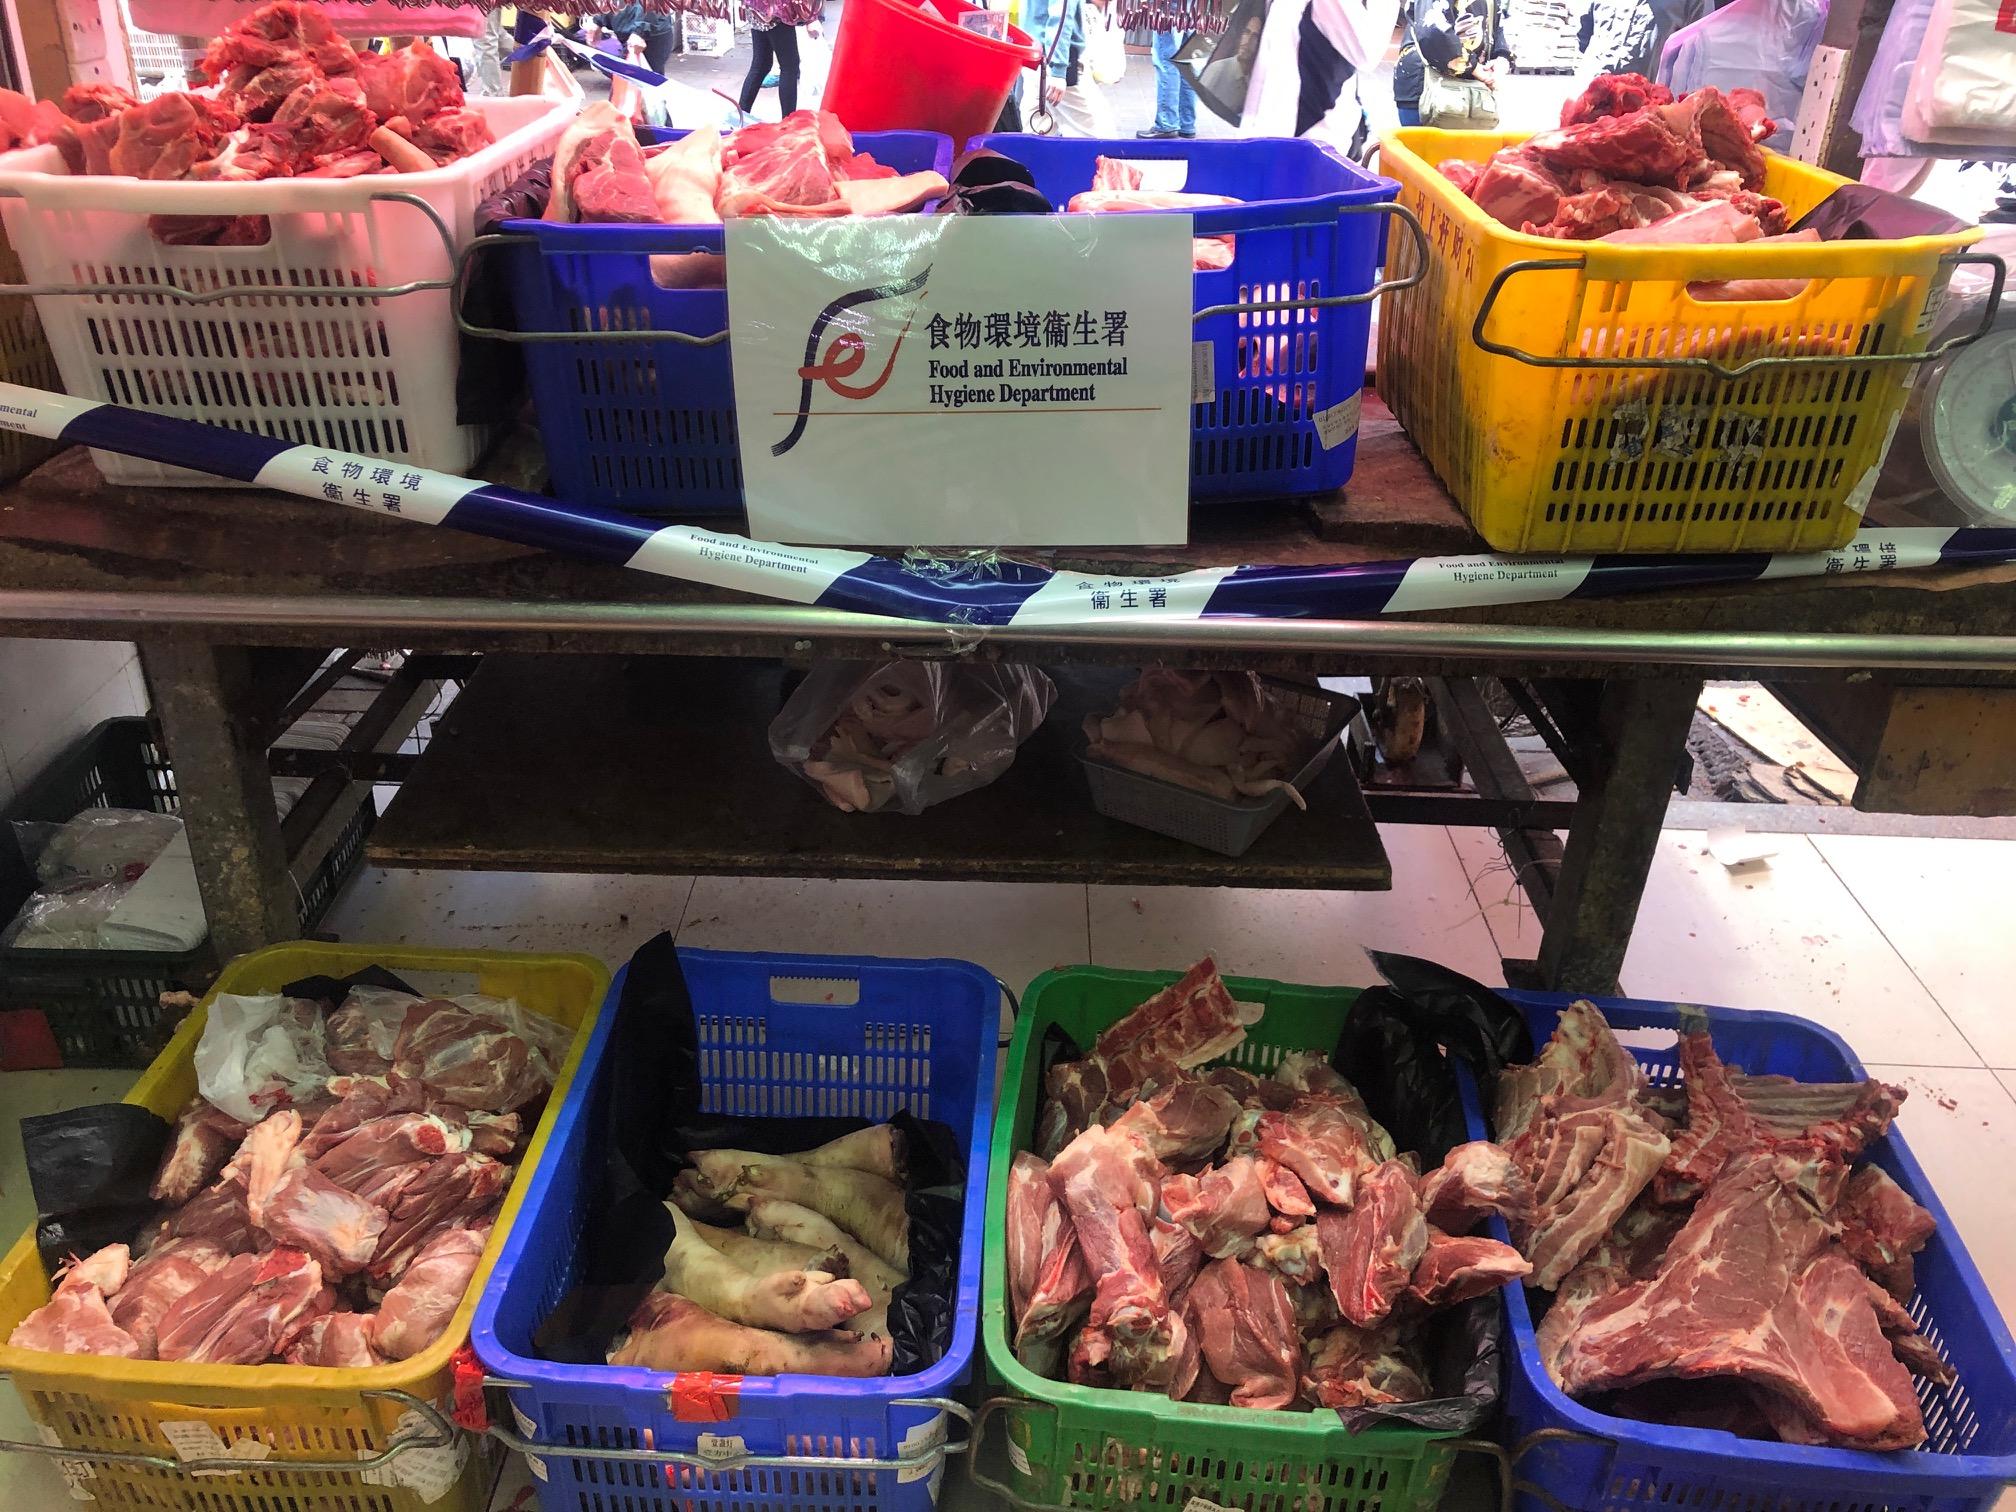 The Food and Environmental Hygiene Department (FEHD) raided a licensed fresh provision shop in Tai Wing Lane, Tai Po, suspected of selling chilled meat or frozen meat as fresh meat in a blitz operation today (March 8). Photo shows the meat seized by the FEHD officers during the operation.